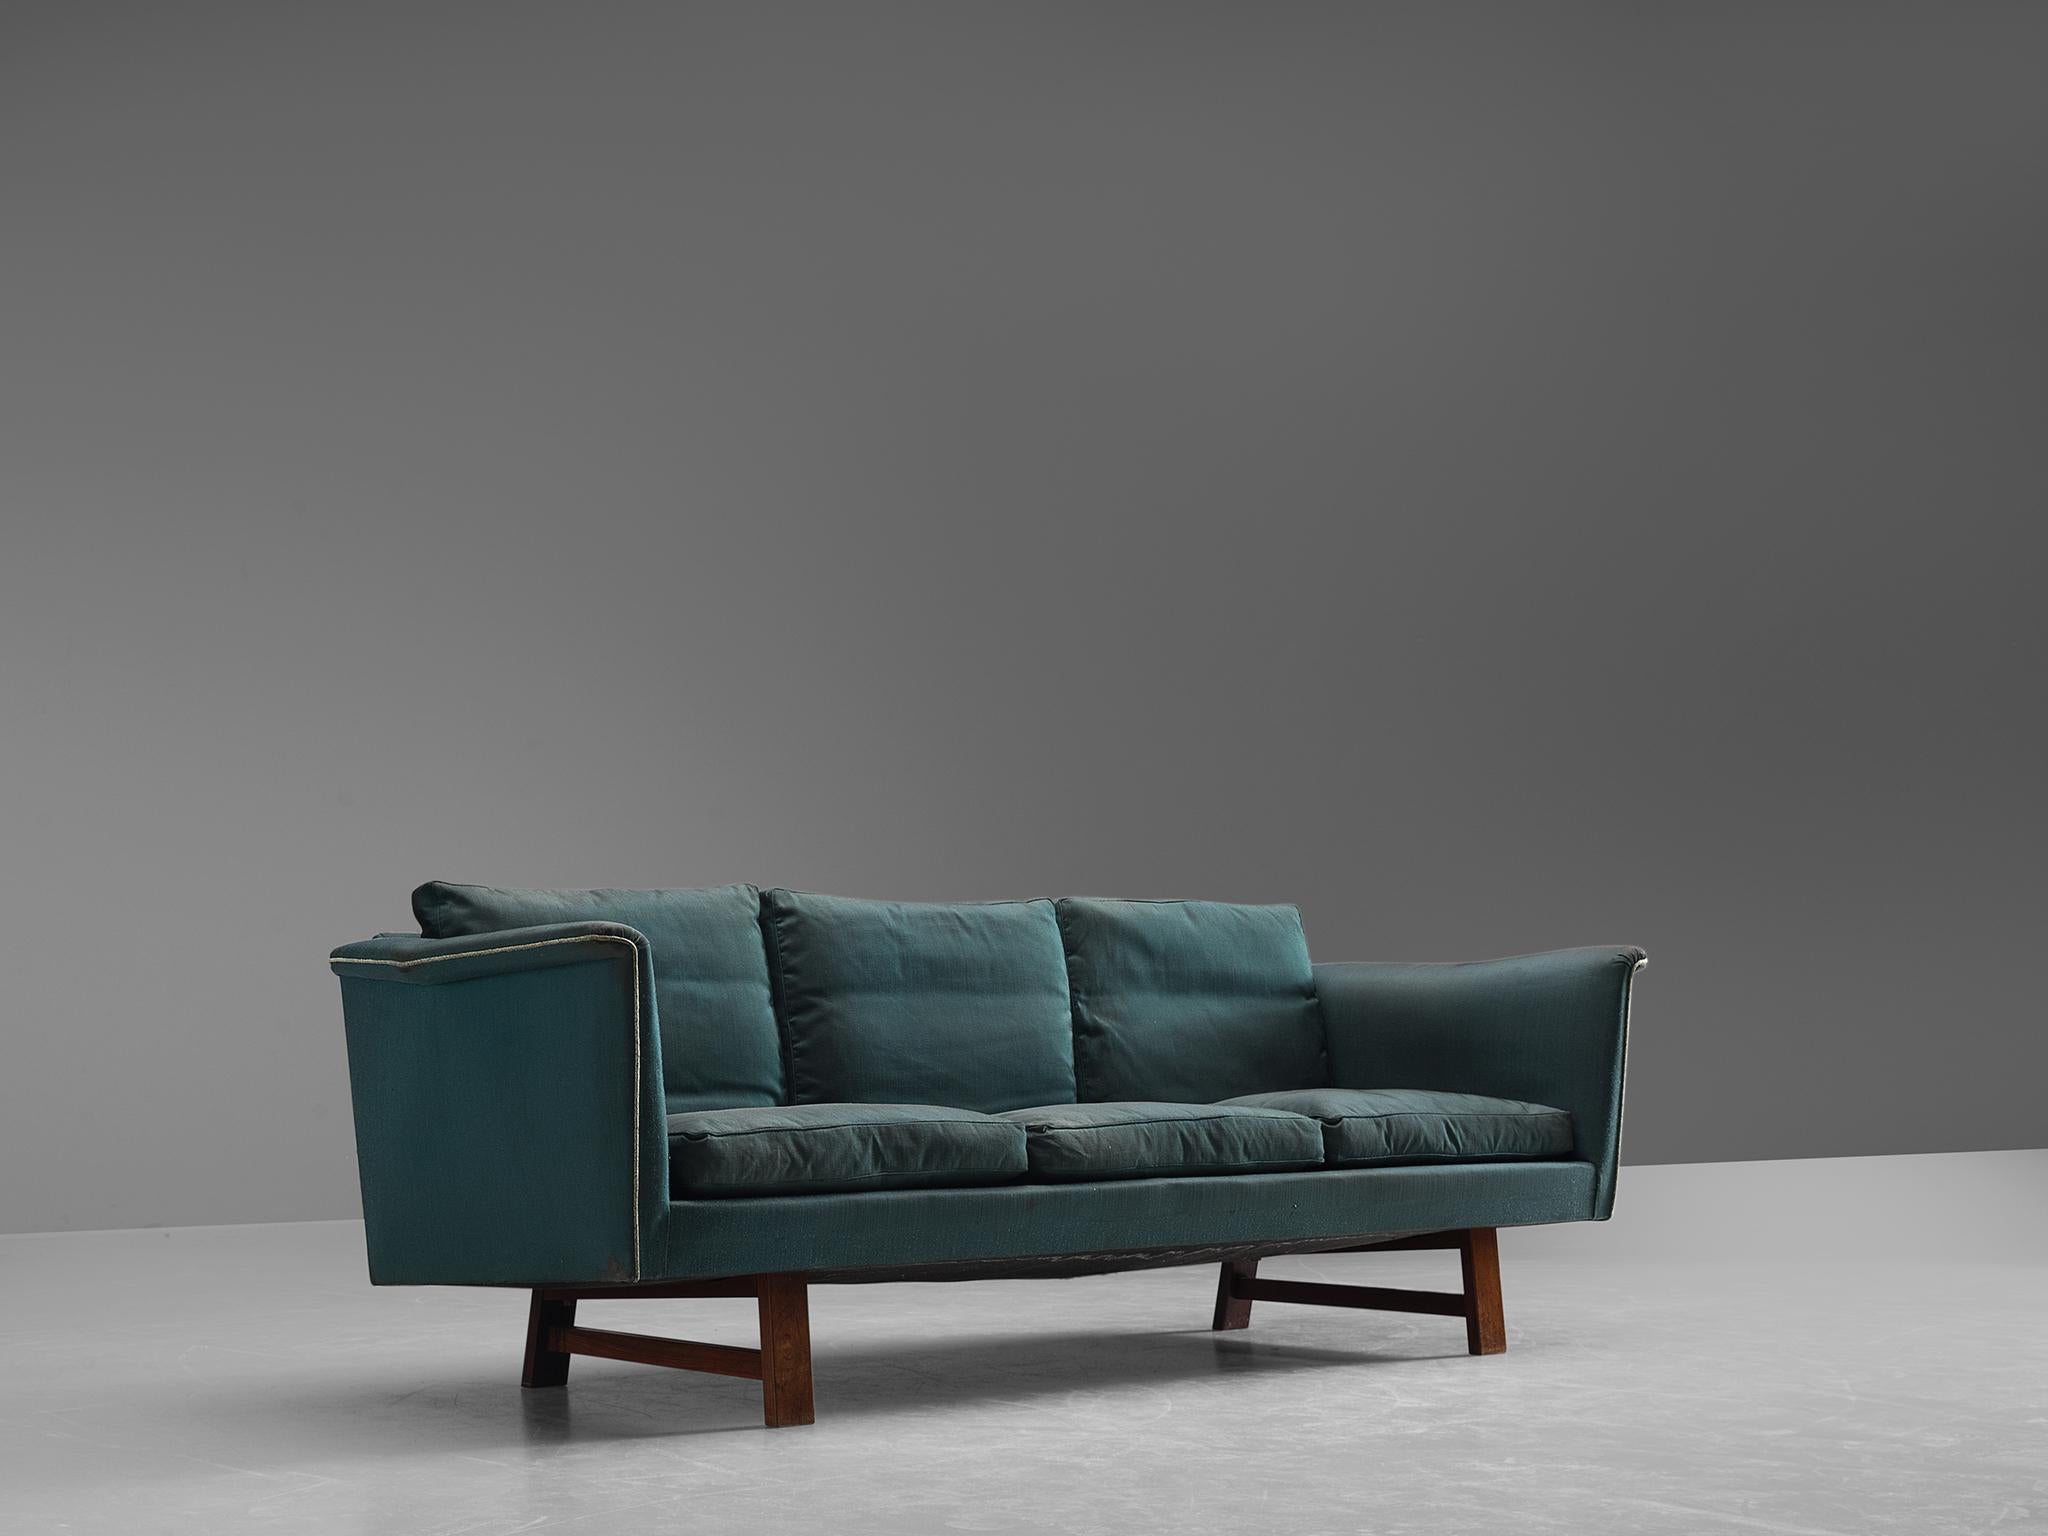 Three-seat sofa, fabric and wood, Denmark, 1950s.

This comfortable sofa has a sturdy appearance, with elegant armrests that flow outwards. The horizontal character is emphasized by the geometric wooden frame that matches wonderfully with the seat.